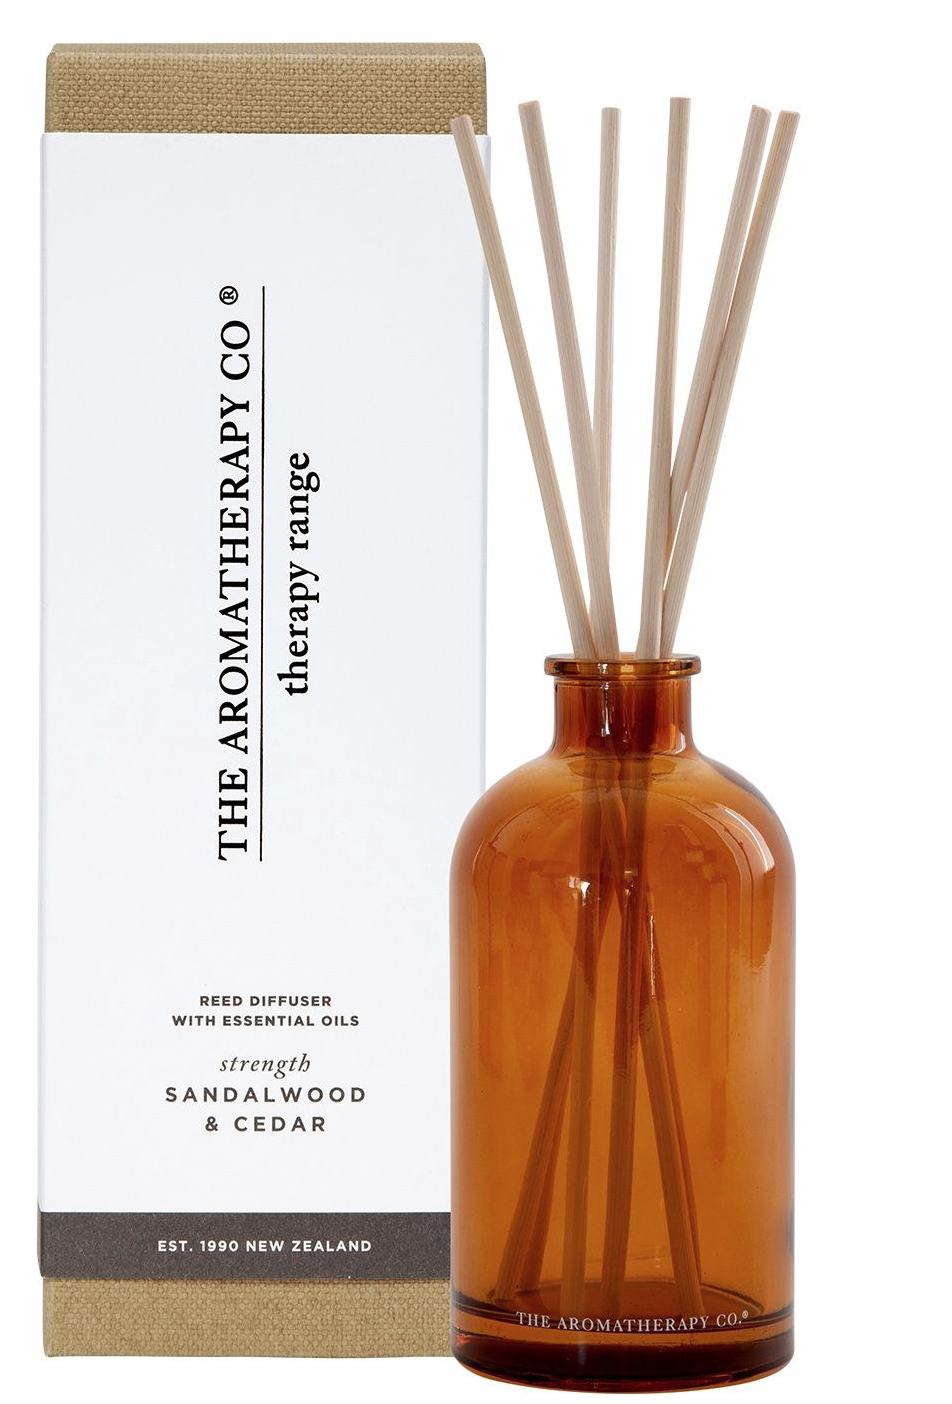 THE AROMATHERAPY CO ©
therapy range

REED DIFFUSER
WITH ESSENTIAL OILS

strength
SANDALWOOD
& CEDAR

EST. 1990 NEW ZEALAND